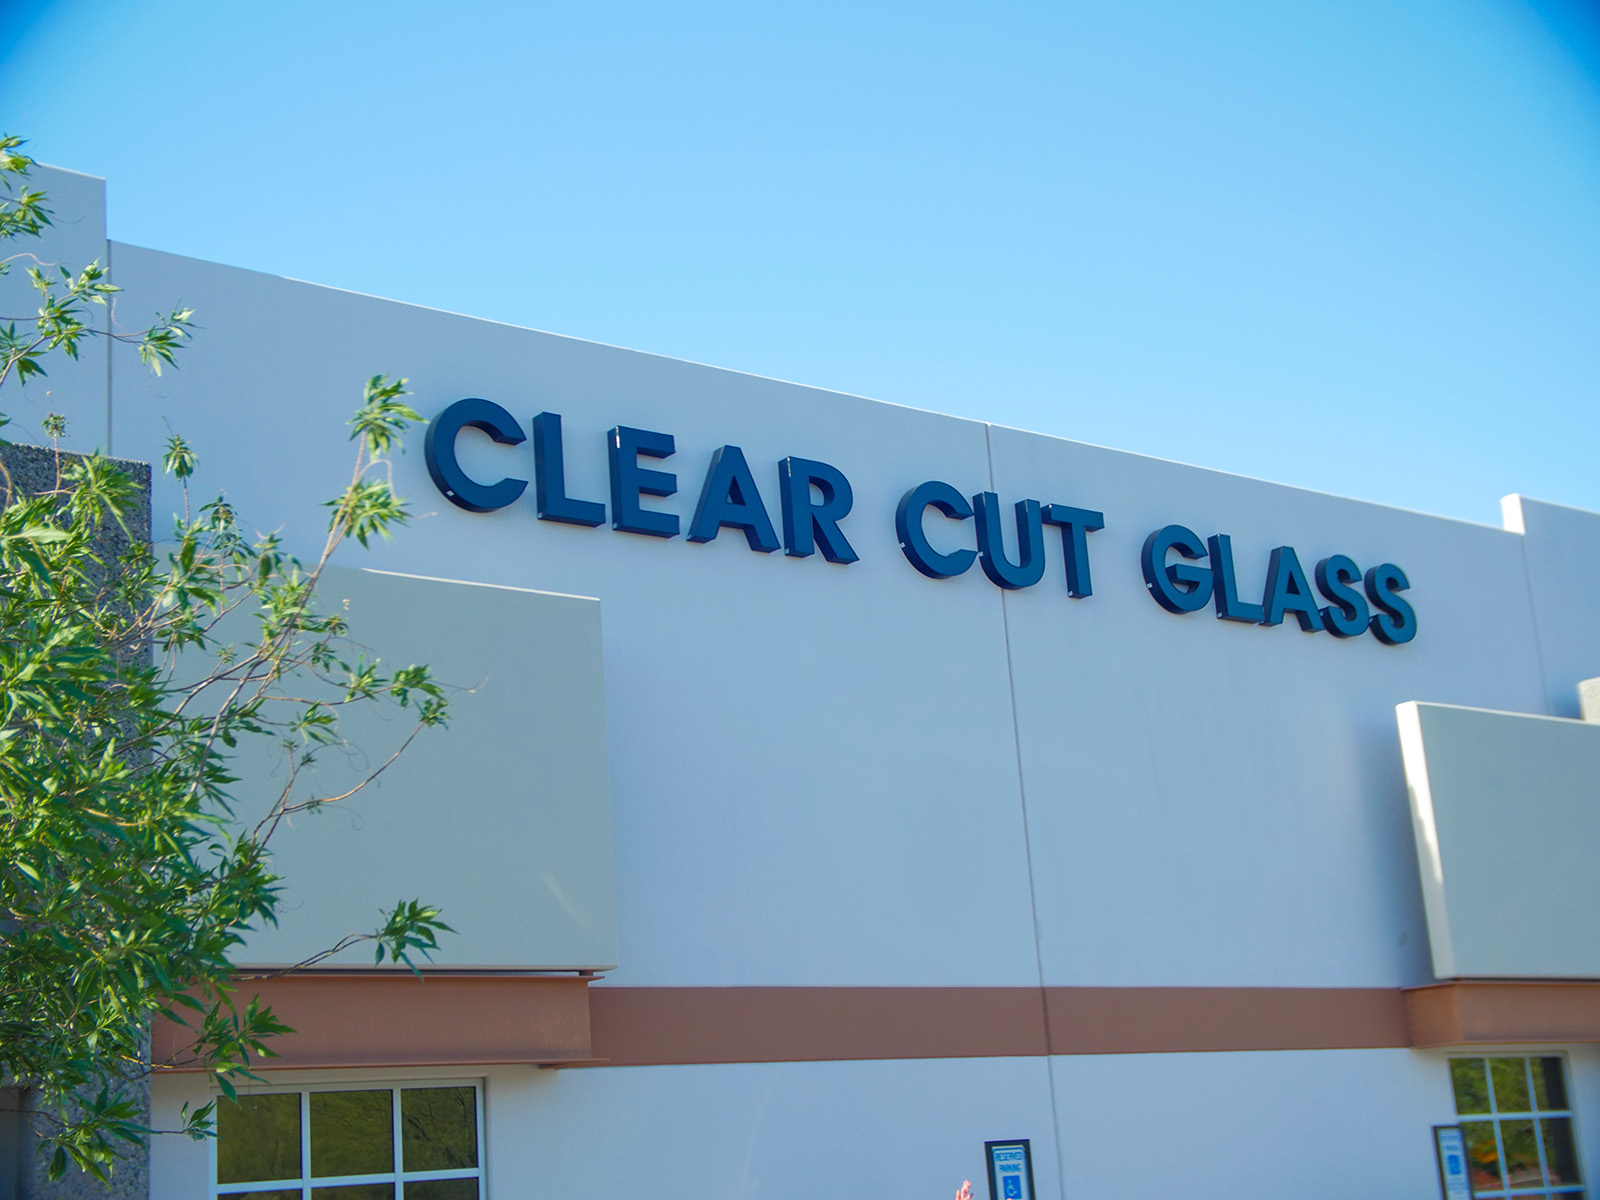 Clear Cut Glass Storefront